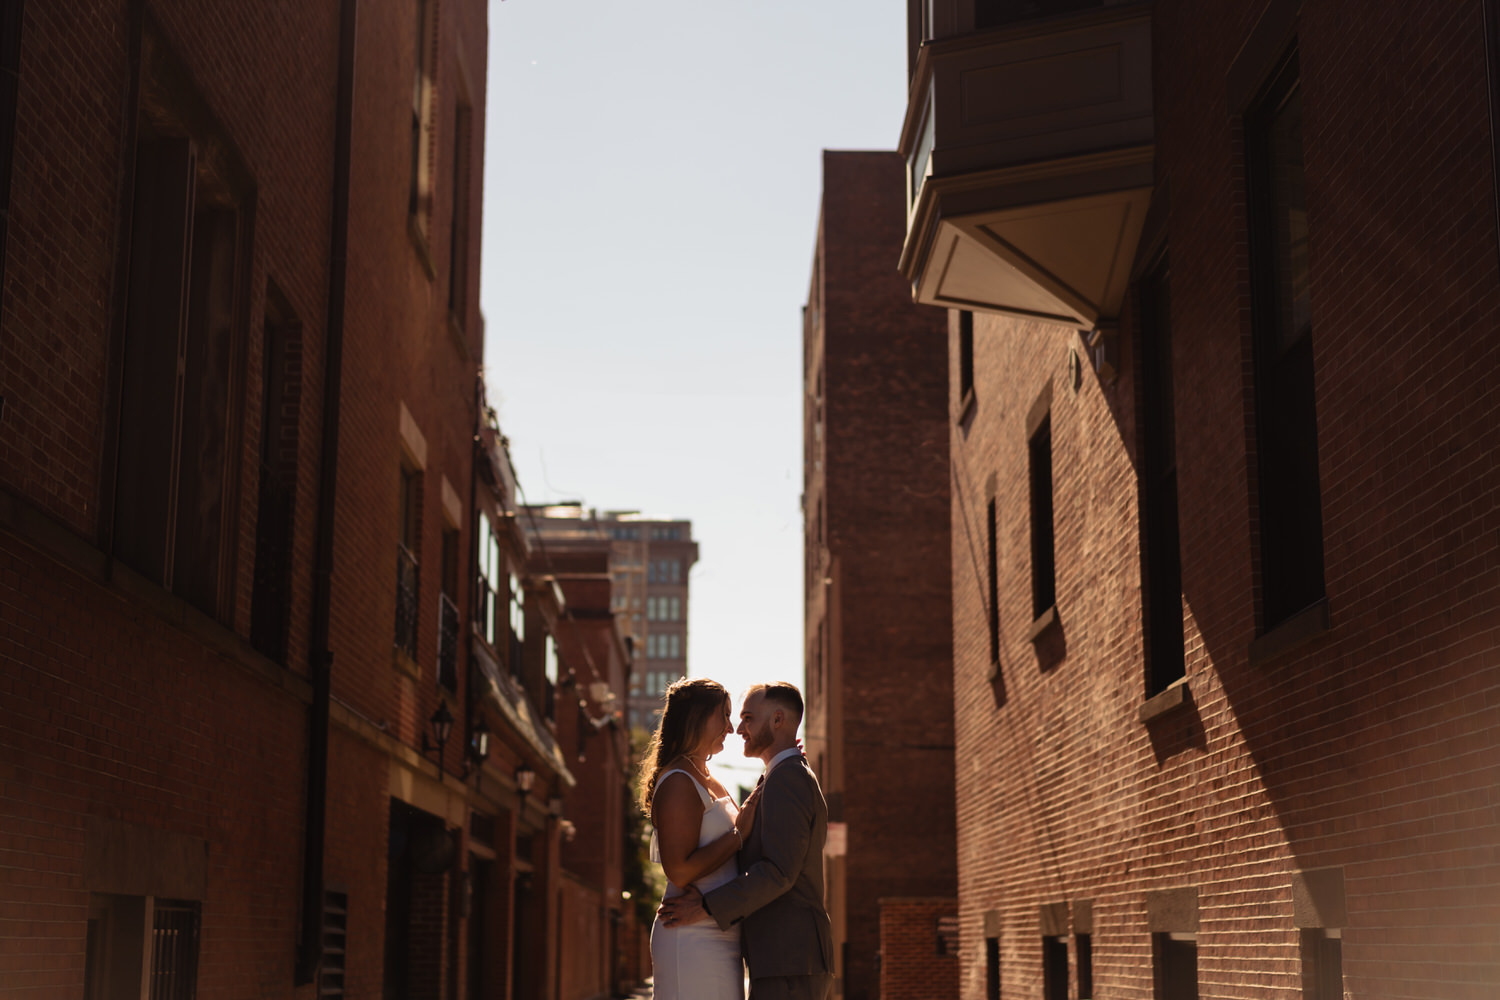 A bride and groom embracing at Boston City Hall wedding.